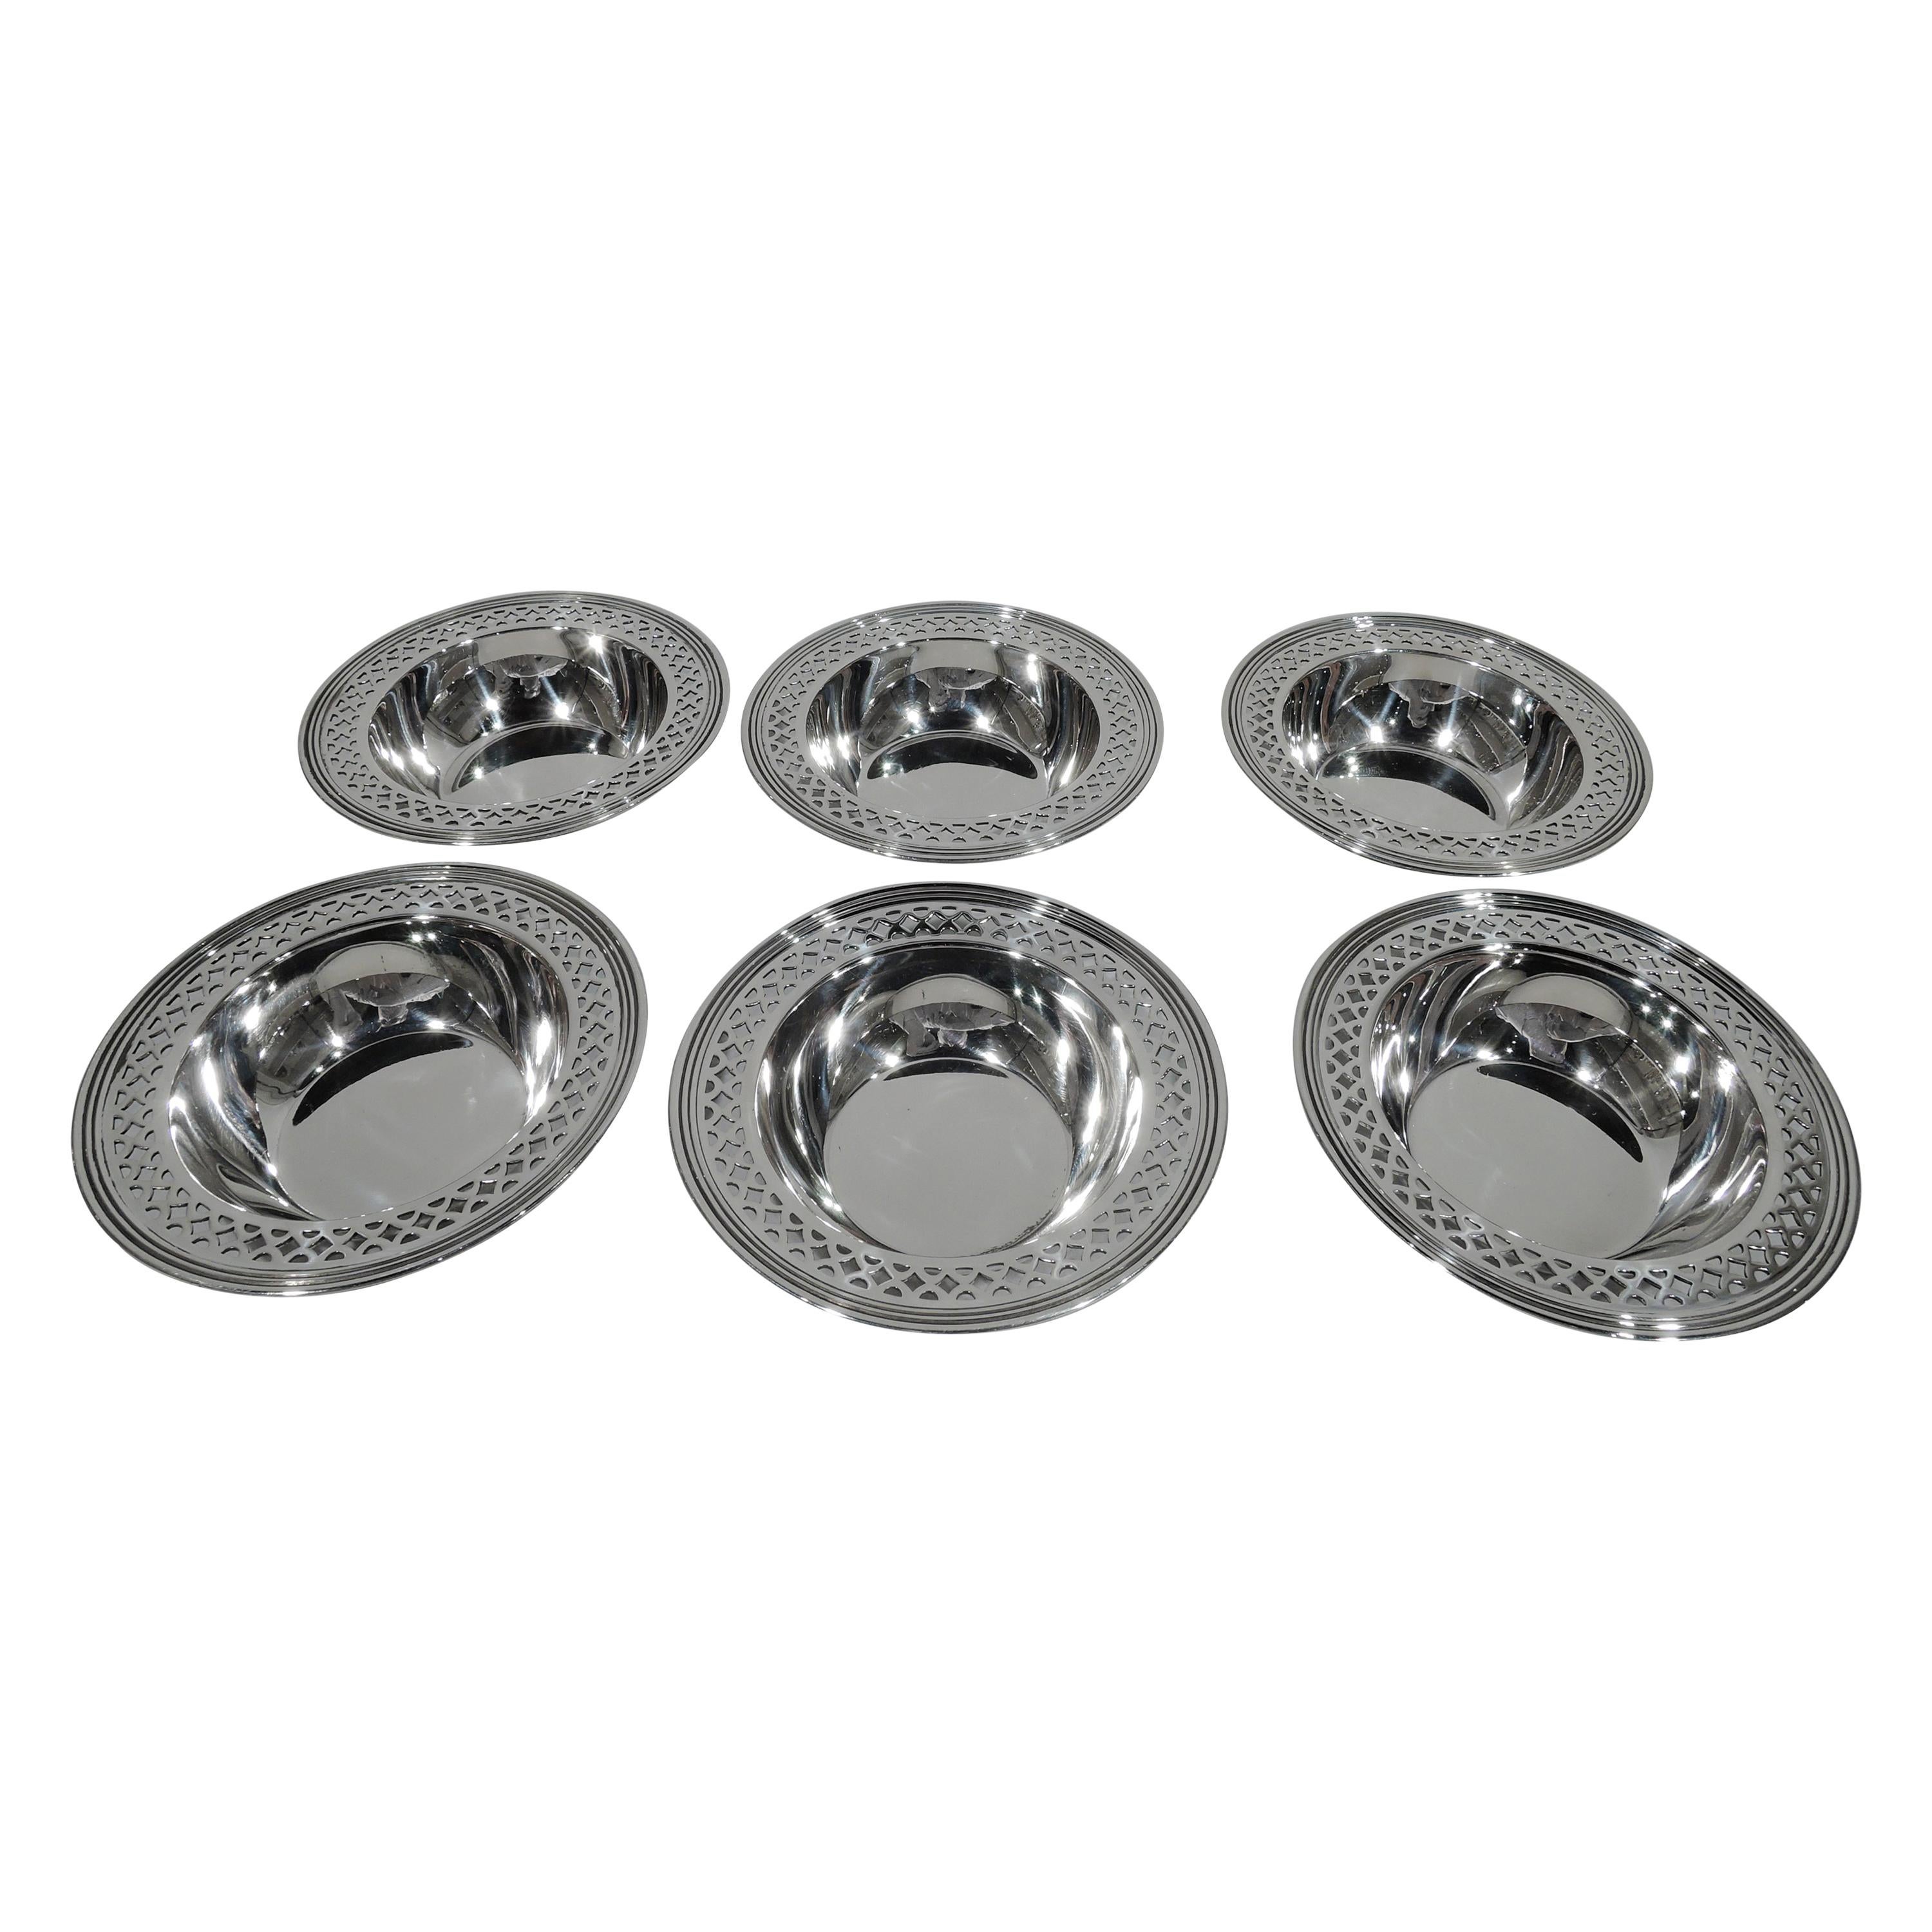 Set of 6 Tiffany Art Deco Modern Sterling Silver Nut Dishes